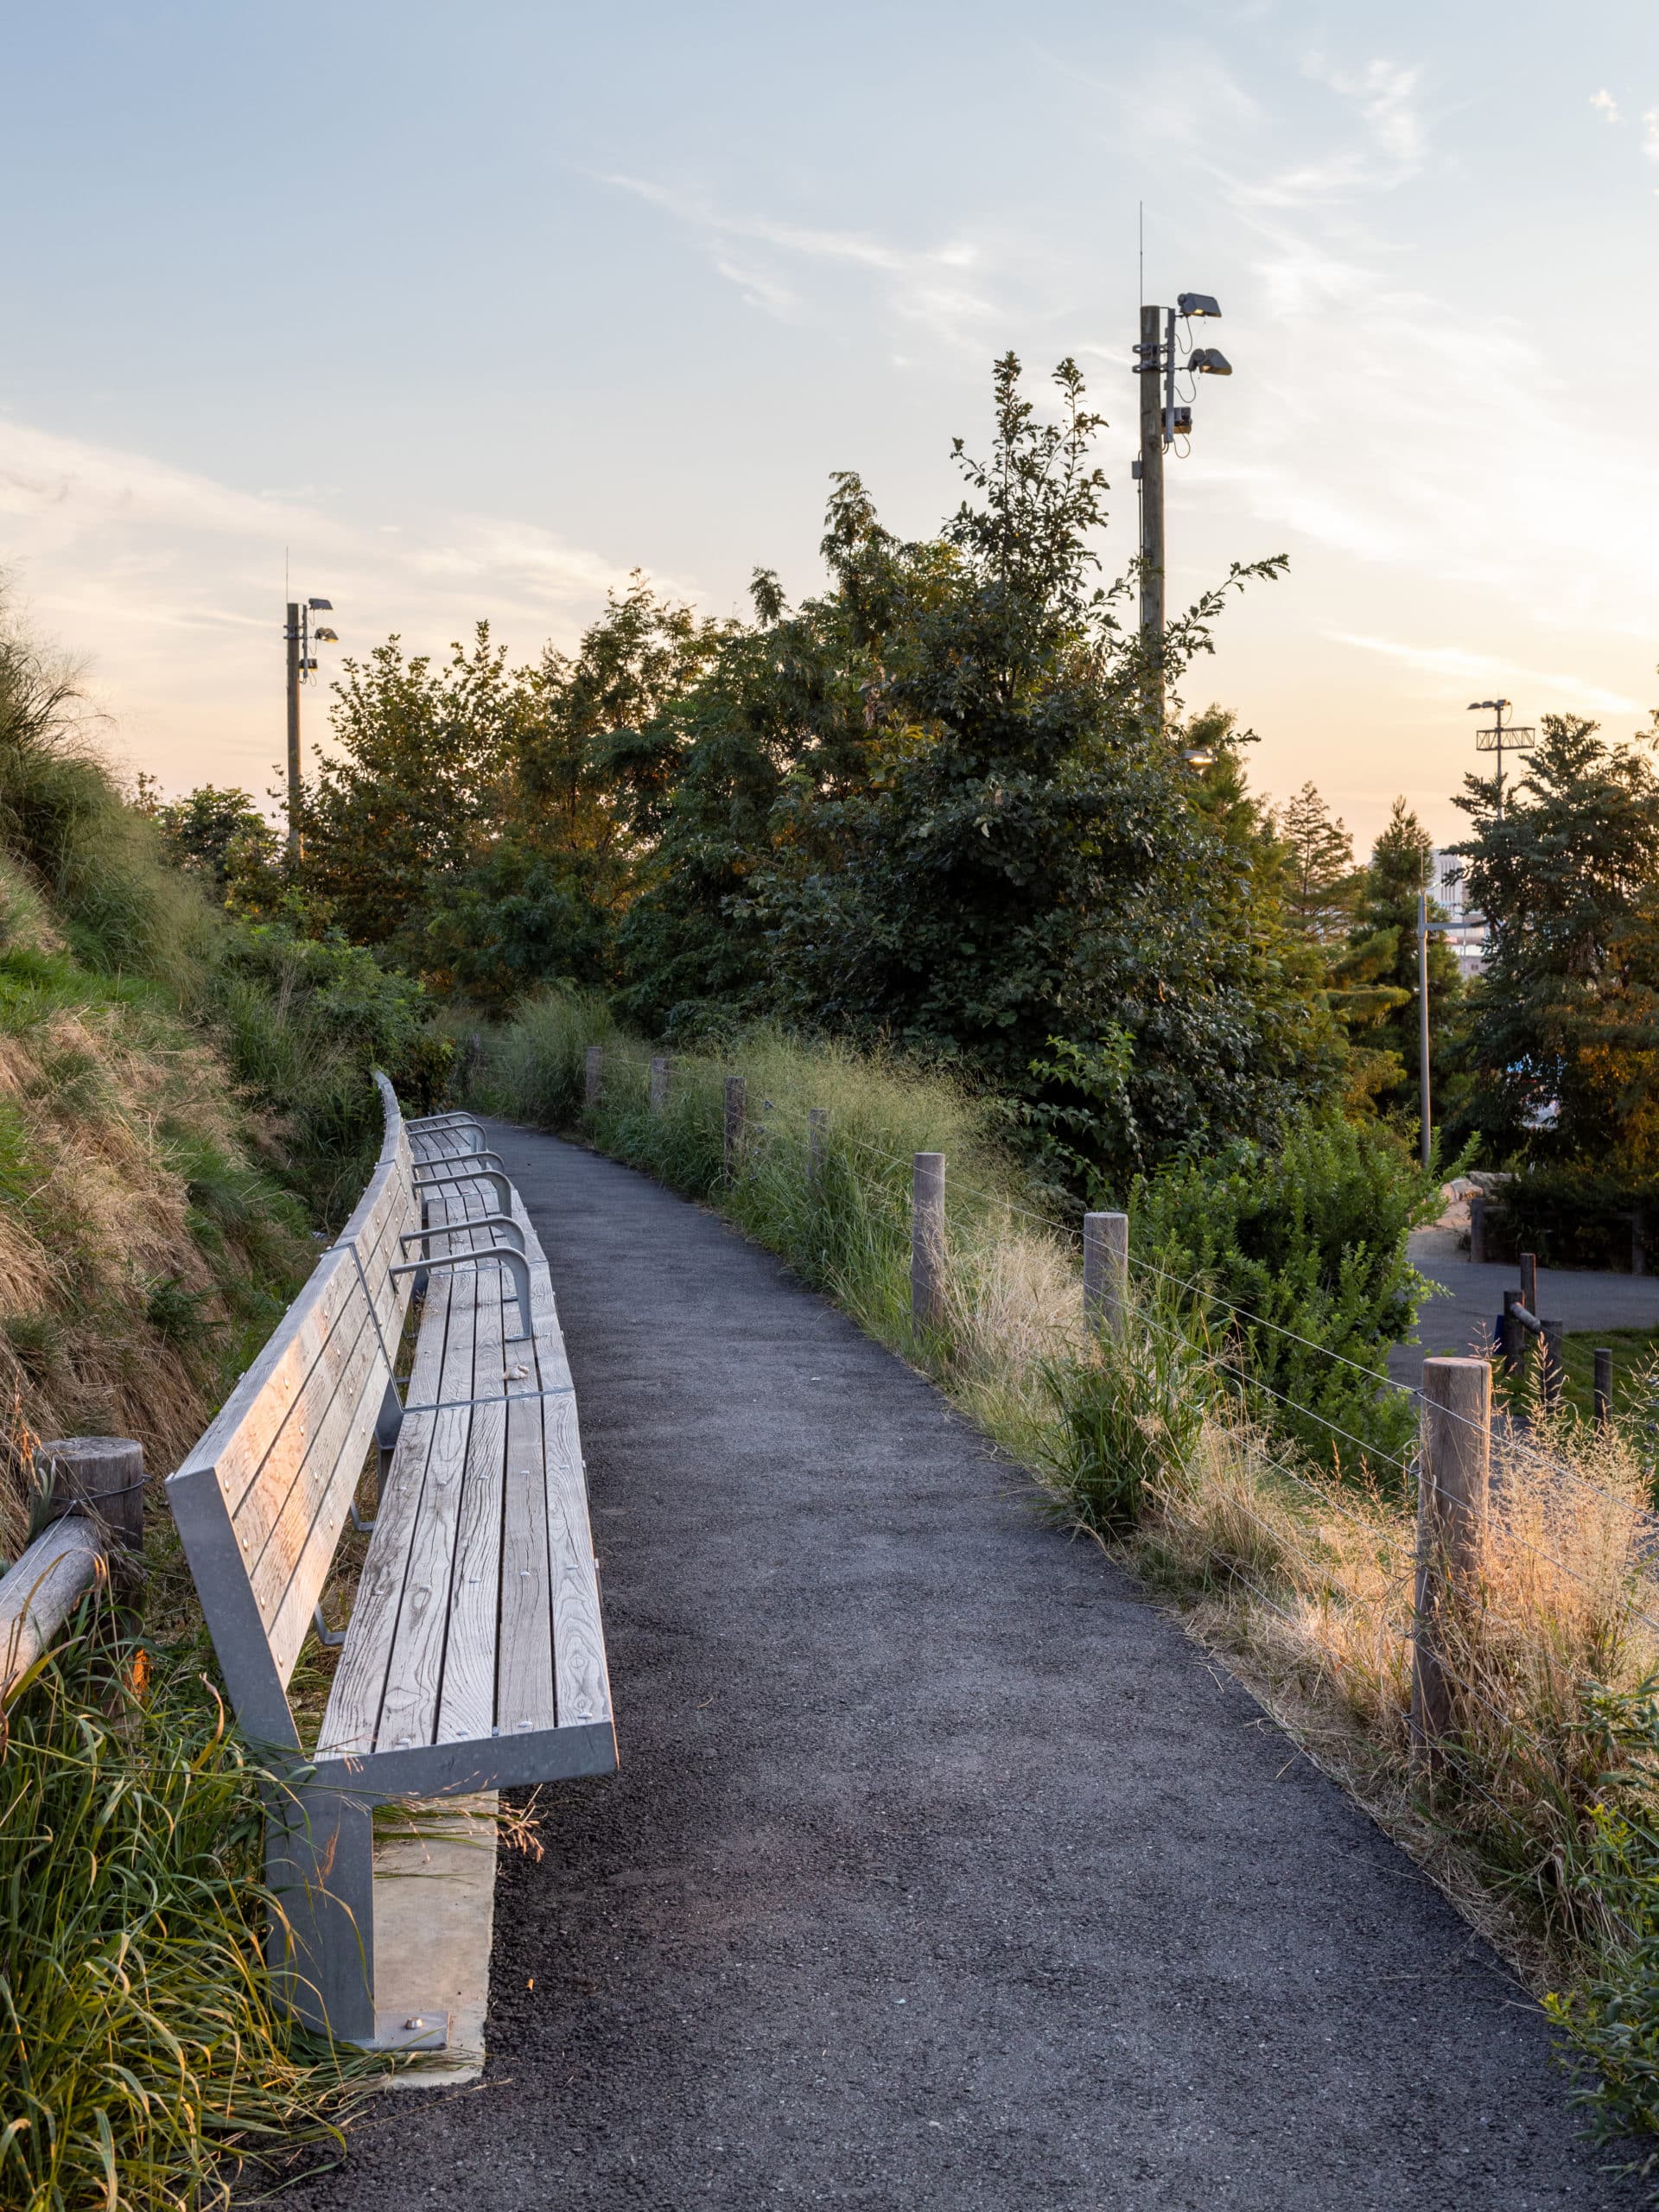 Benches along the pathway on Pier 5 Uplands Sound Attenuating Berm at sunset.